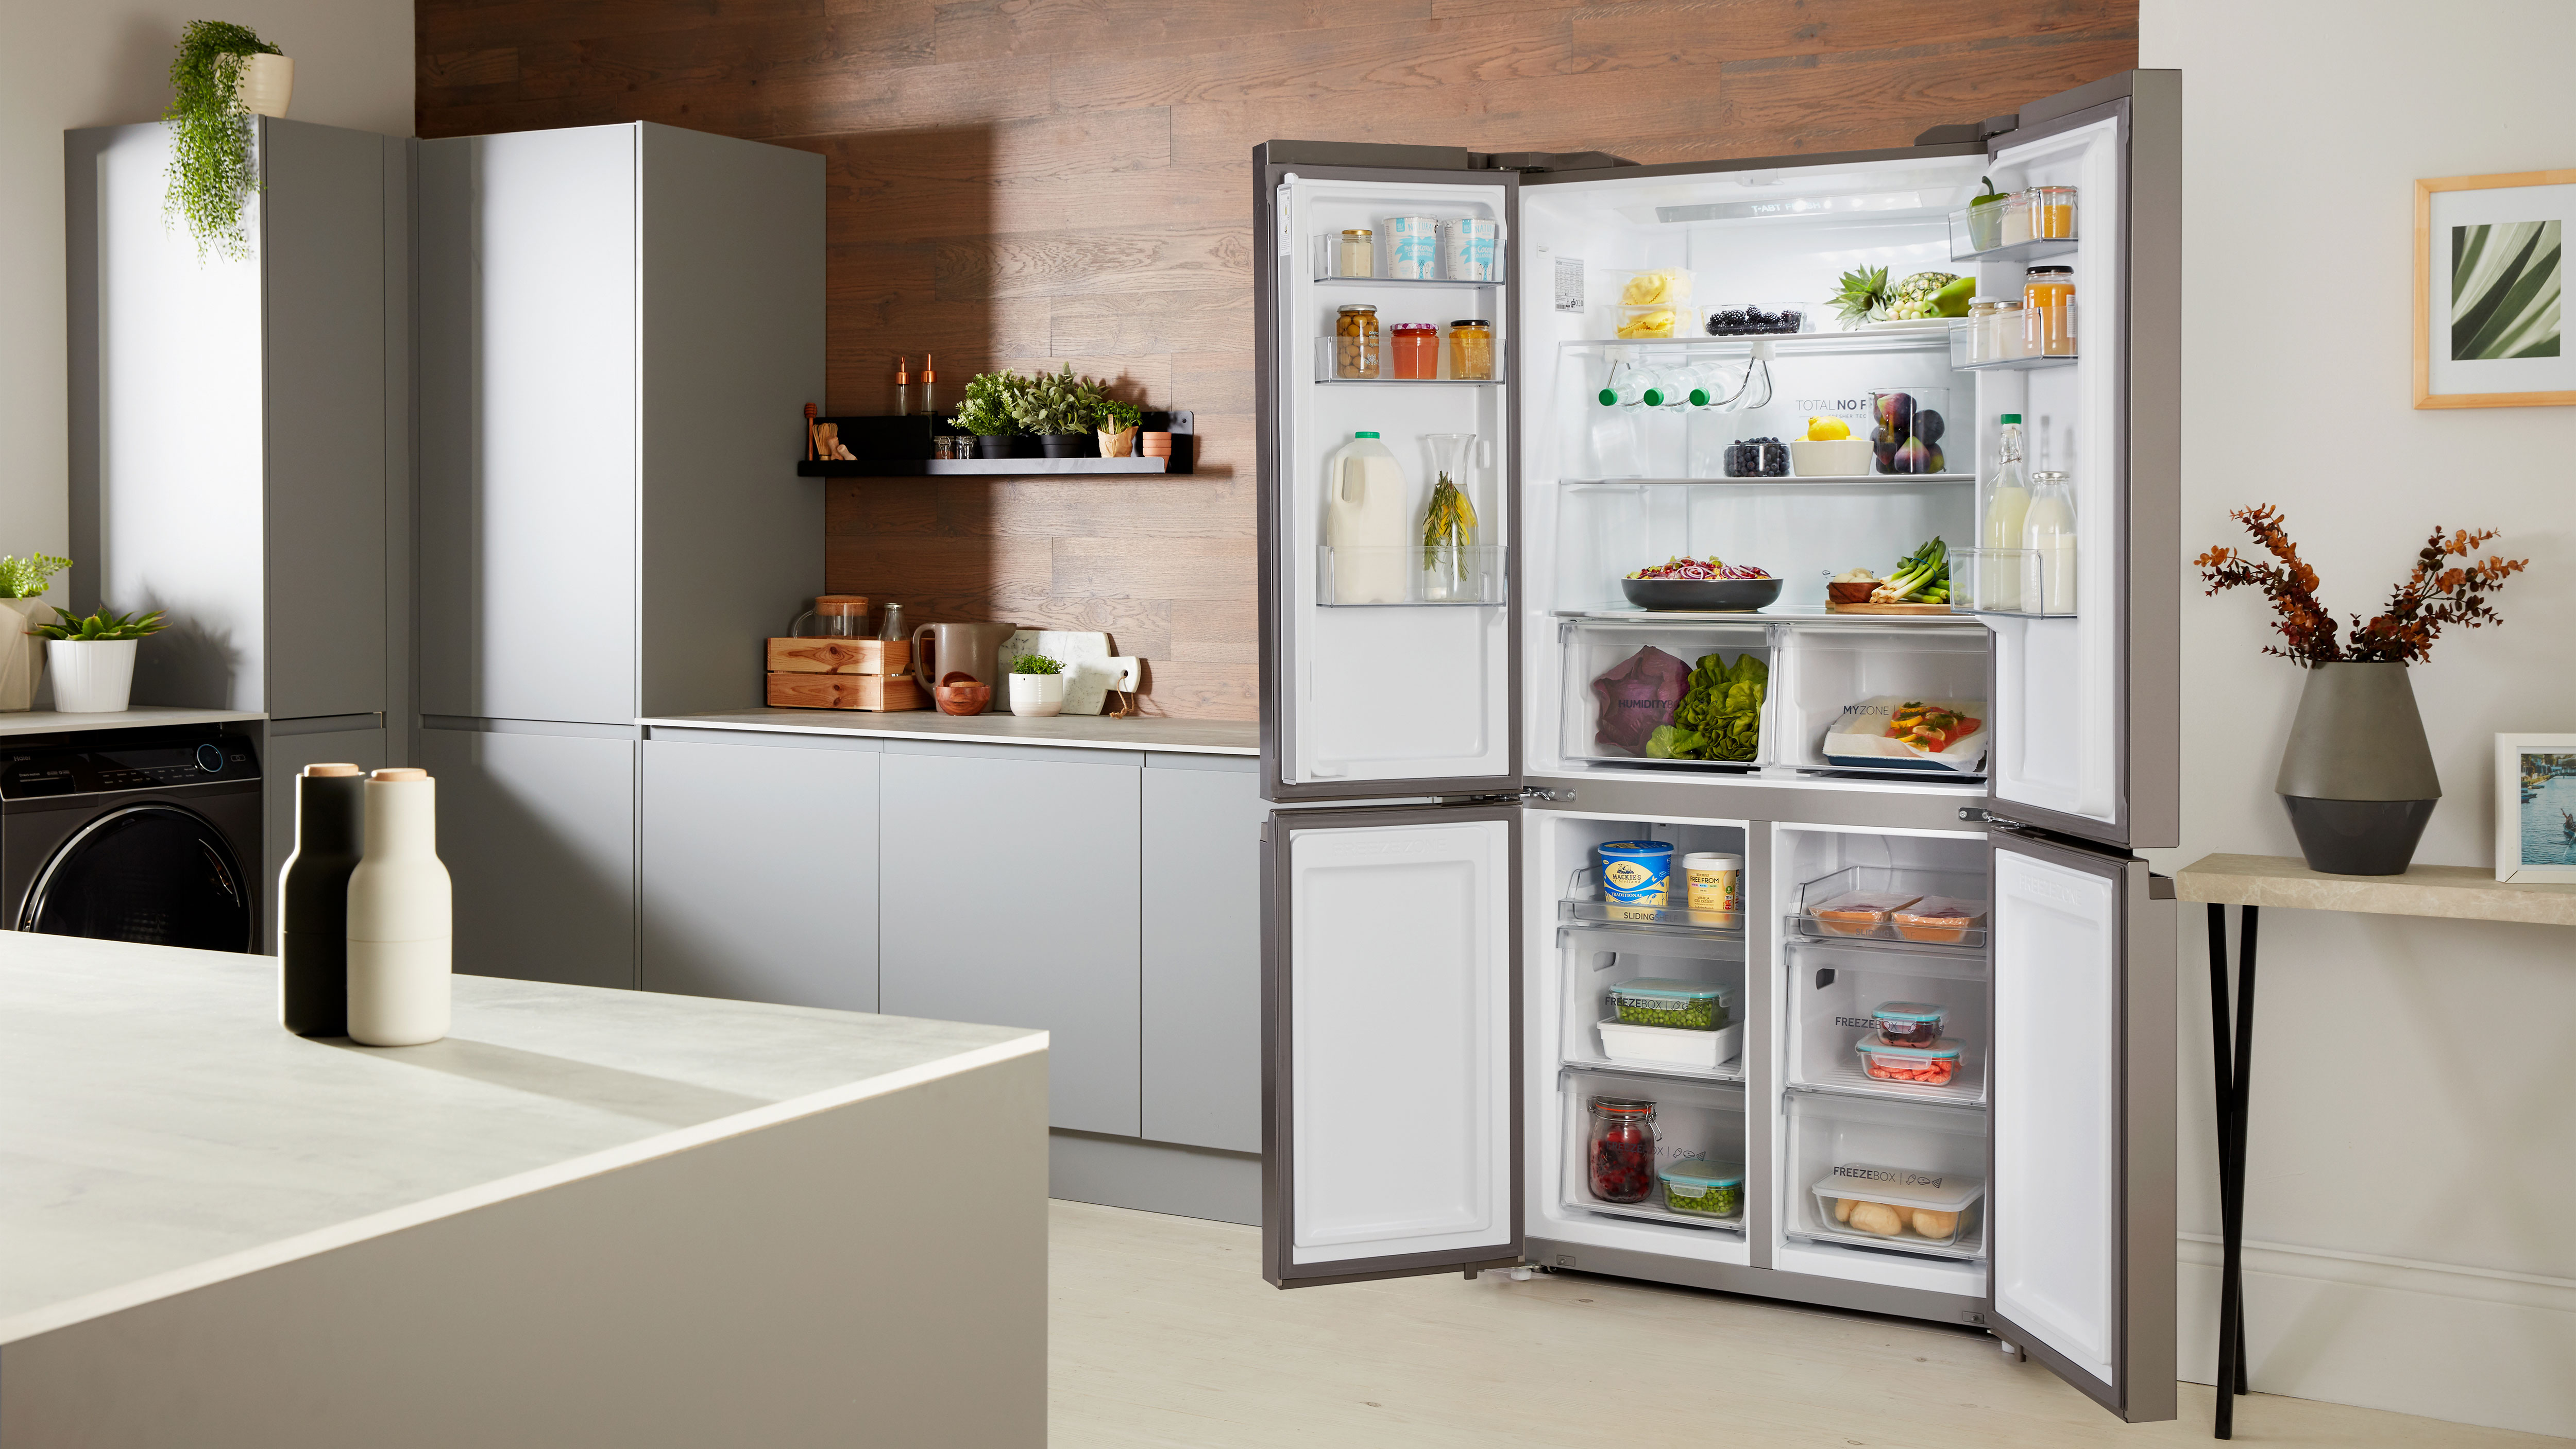 How long does a refrigerator last? | Real Homes